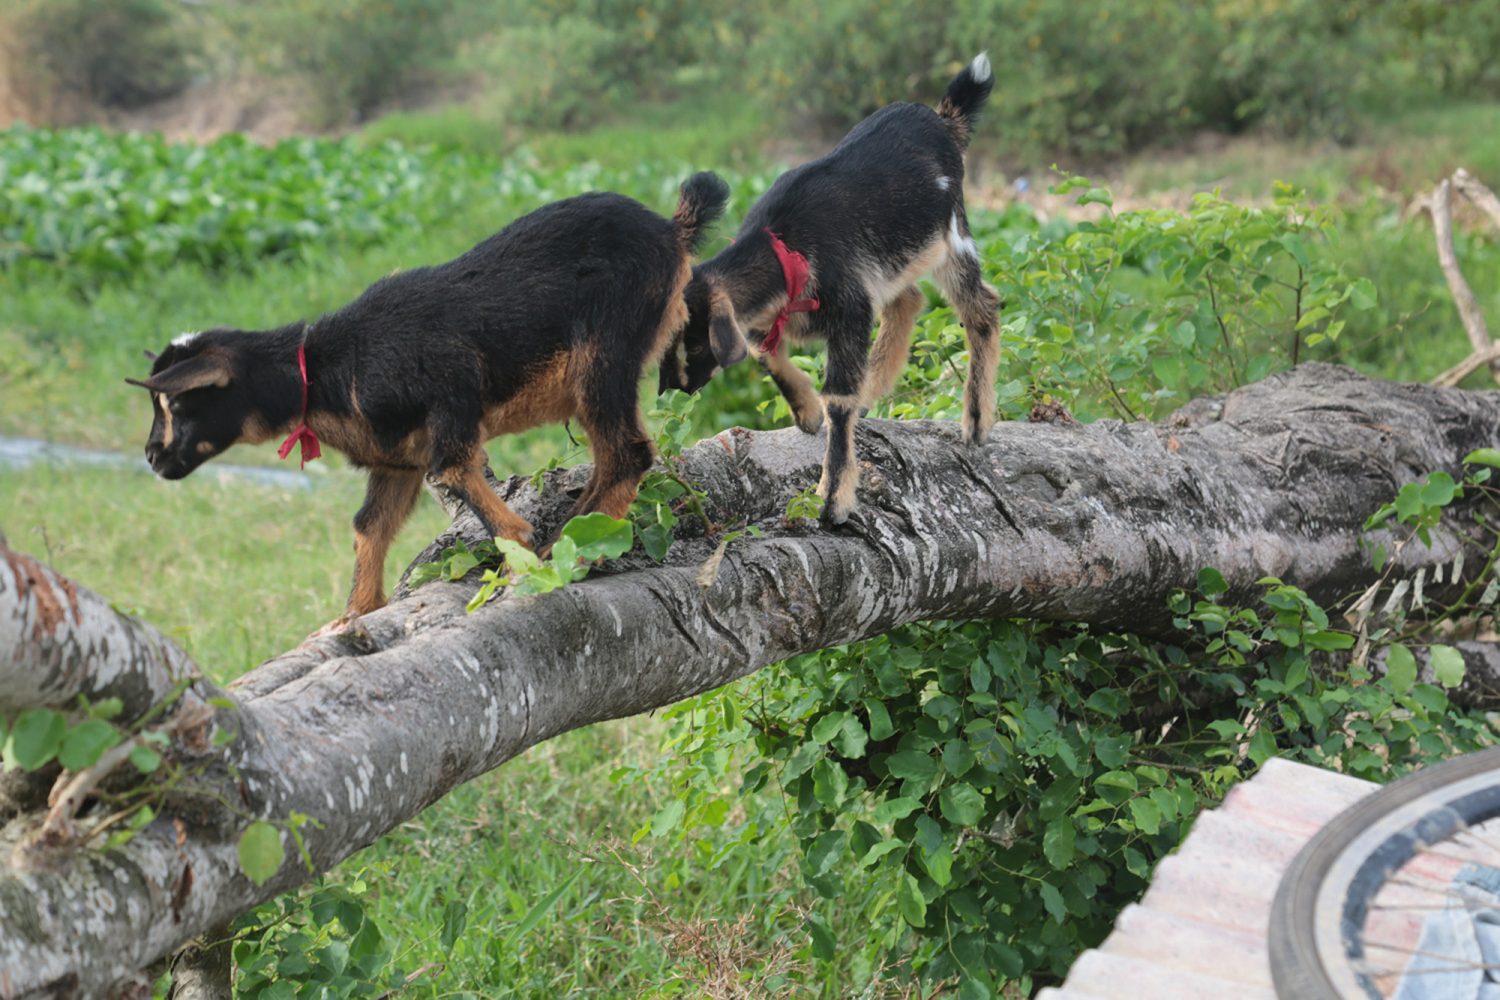 Kids of just a few weeks old explore the area treading along a fallen tree (Photos by Joanna Dhanraj)